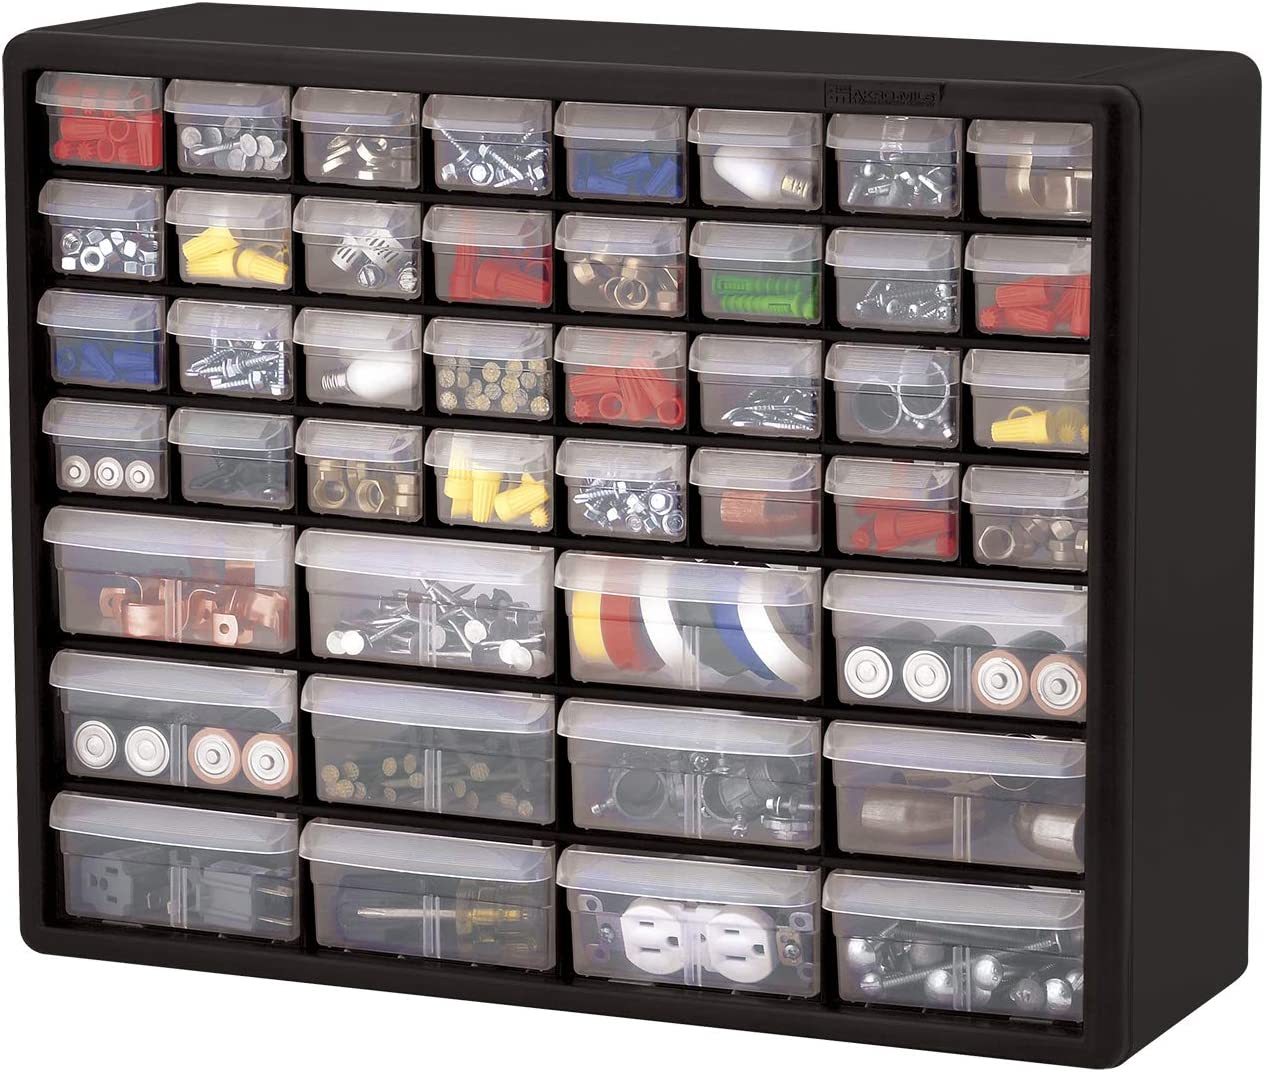 Akro-Mils 44 Drawer Plastic Cabinet Storage Organizer with Drawers for Hardware, Small Parts, Craft Supplies, Black - image 6 of 14